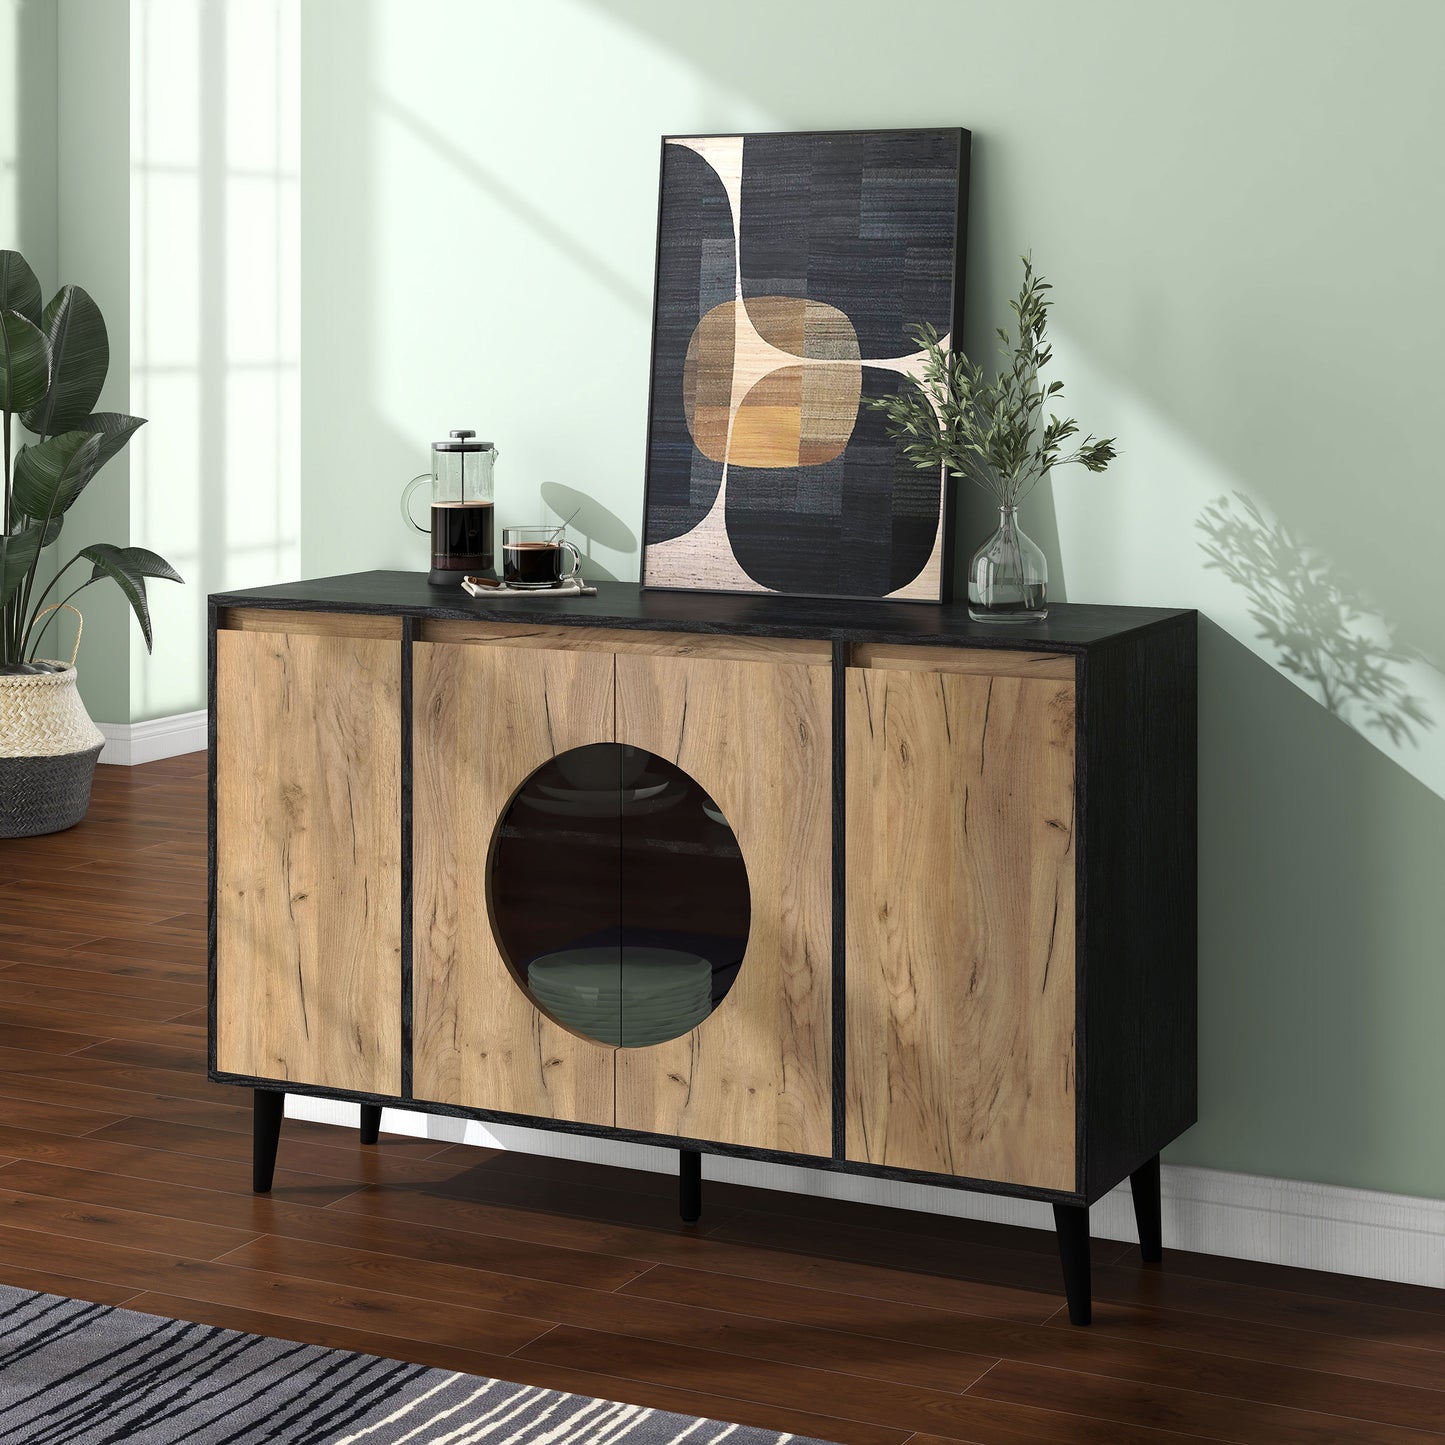 Left angled modern light oak and black six-shelf buffet with four doors in a living area with accessories